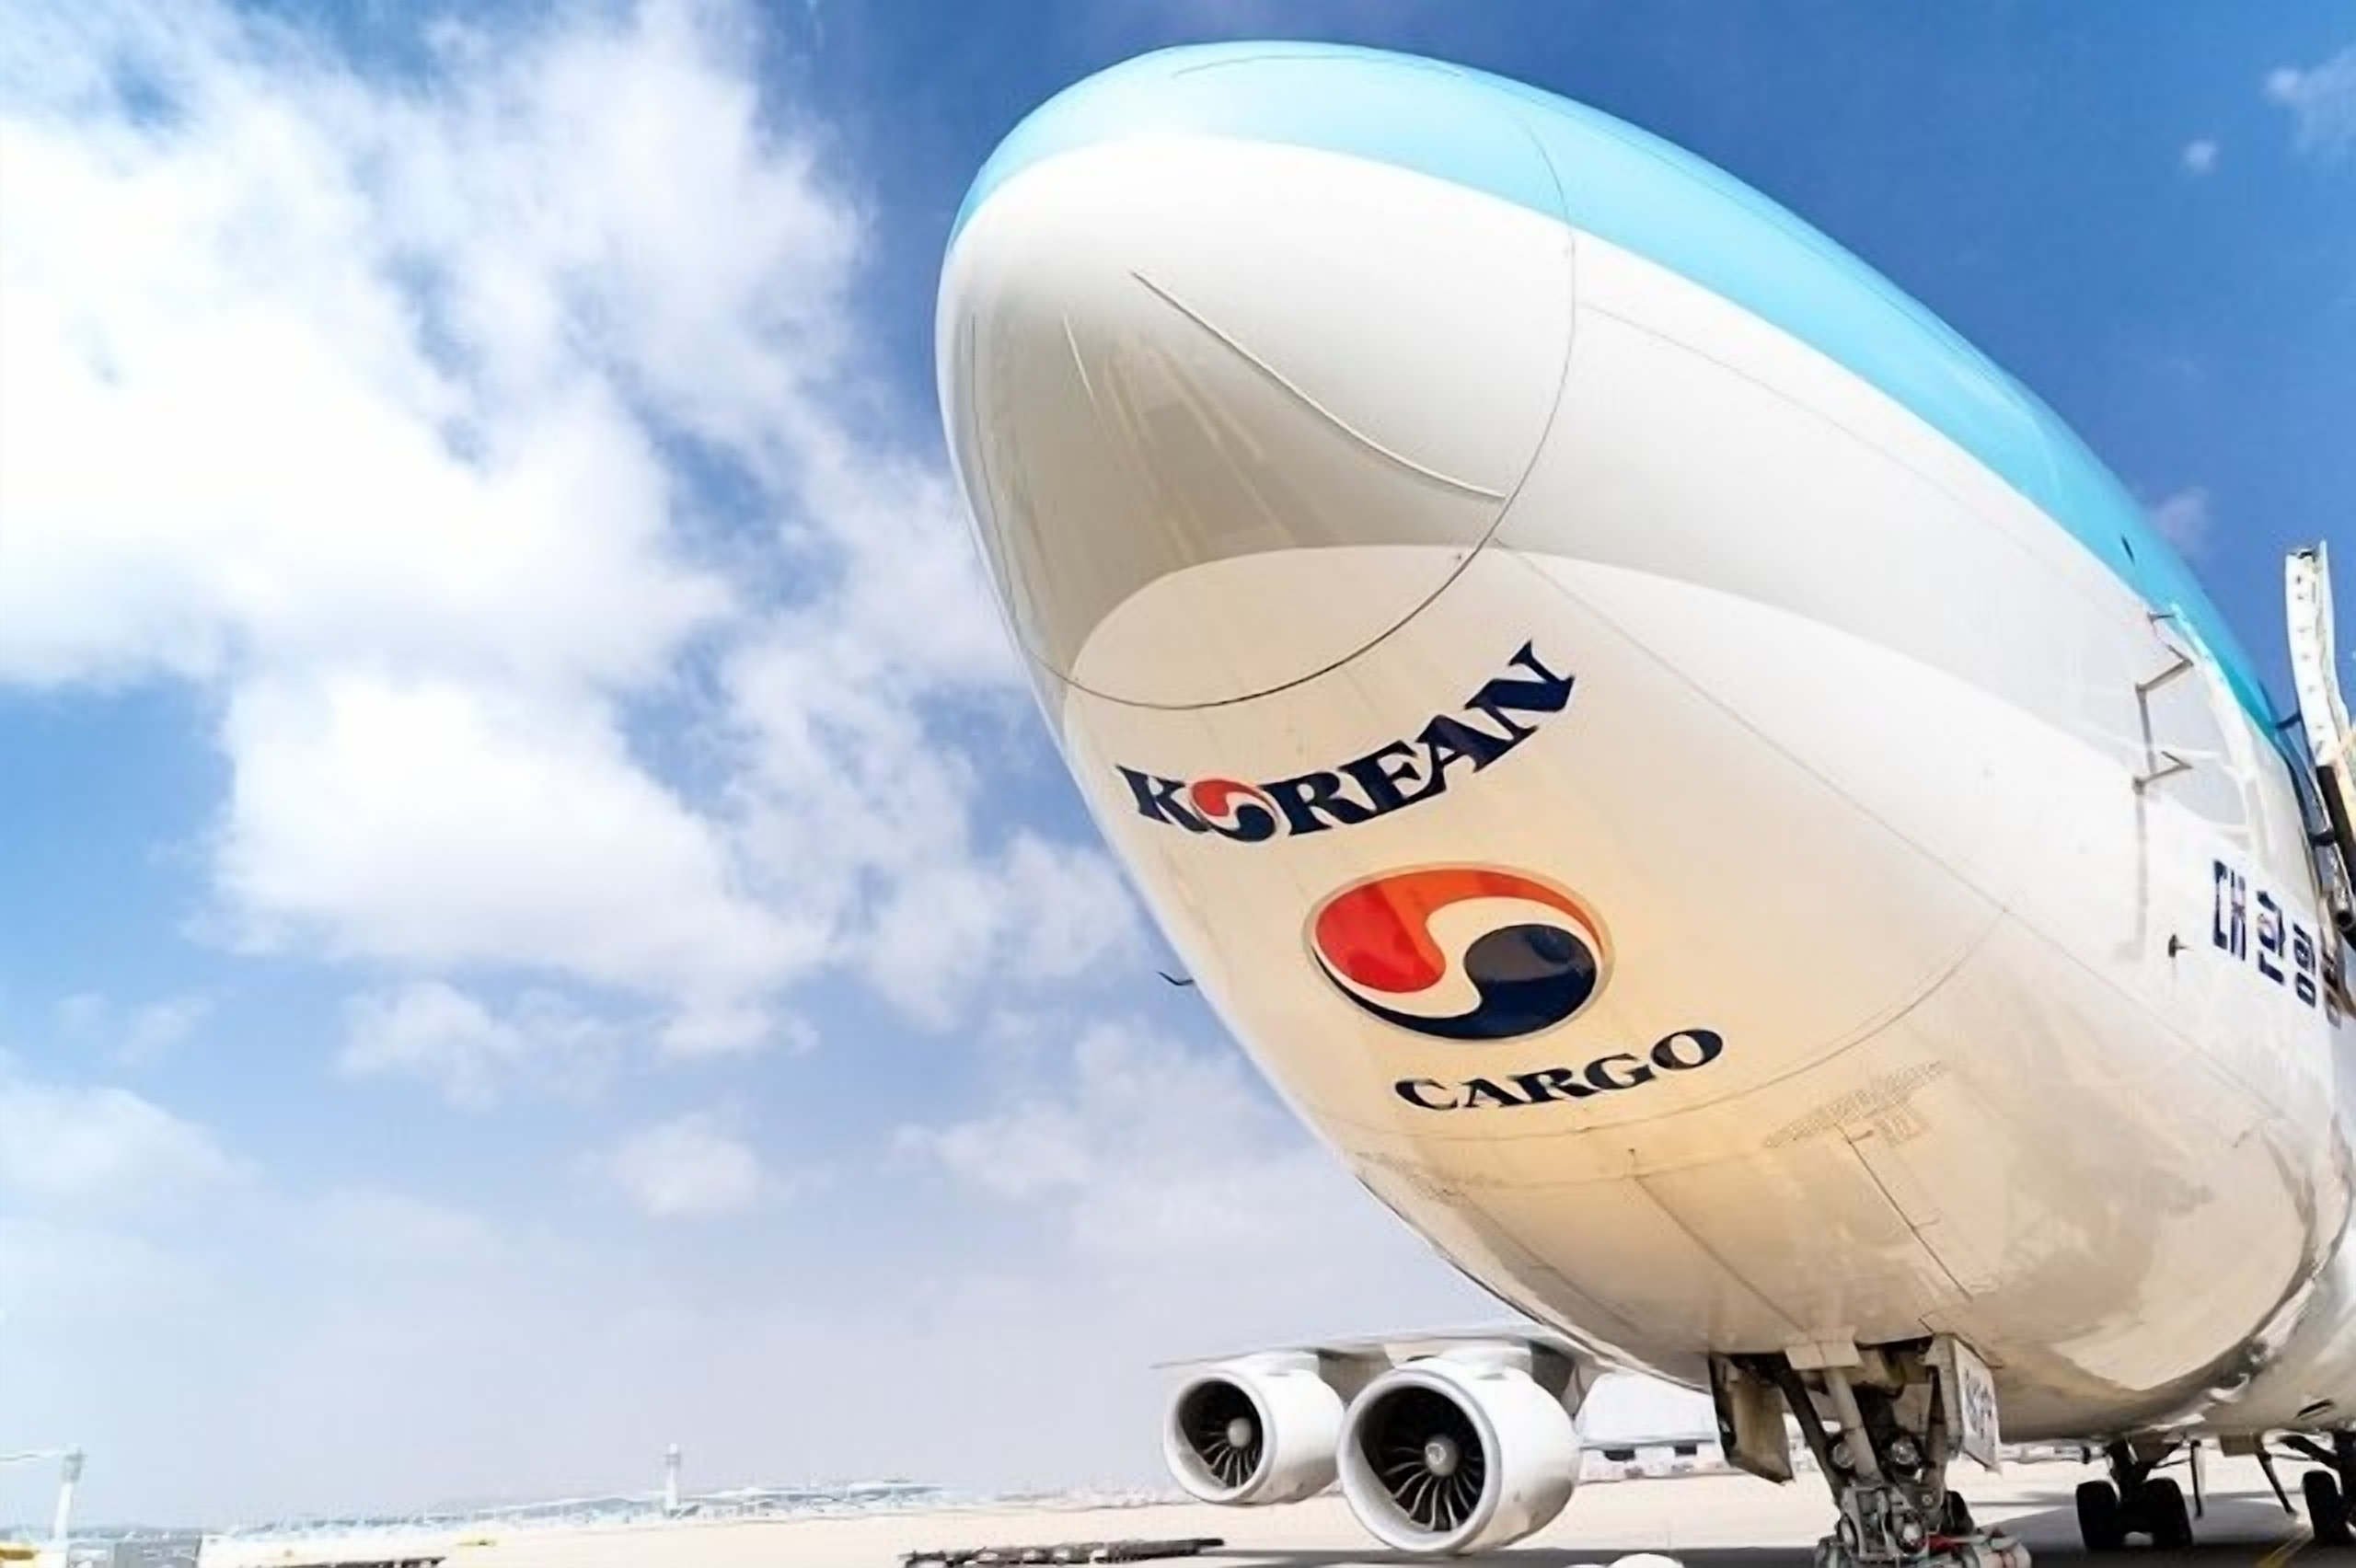 Korean Air to Fully Transition to Electronic Air Waybill